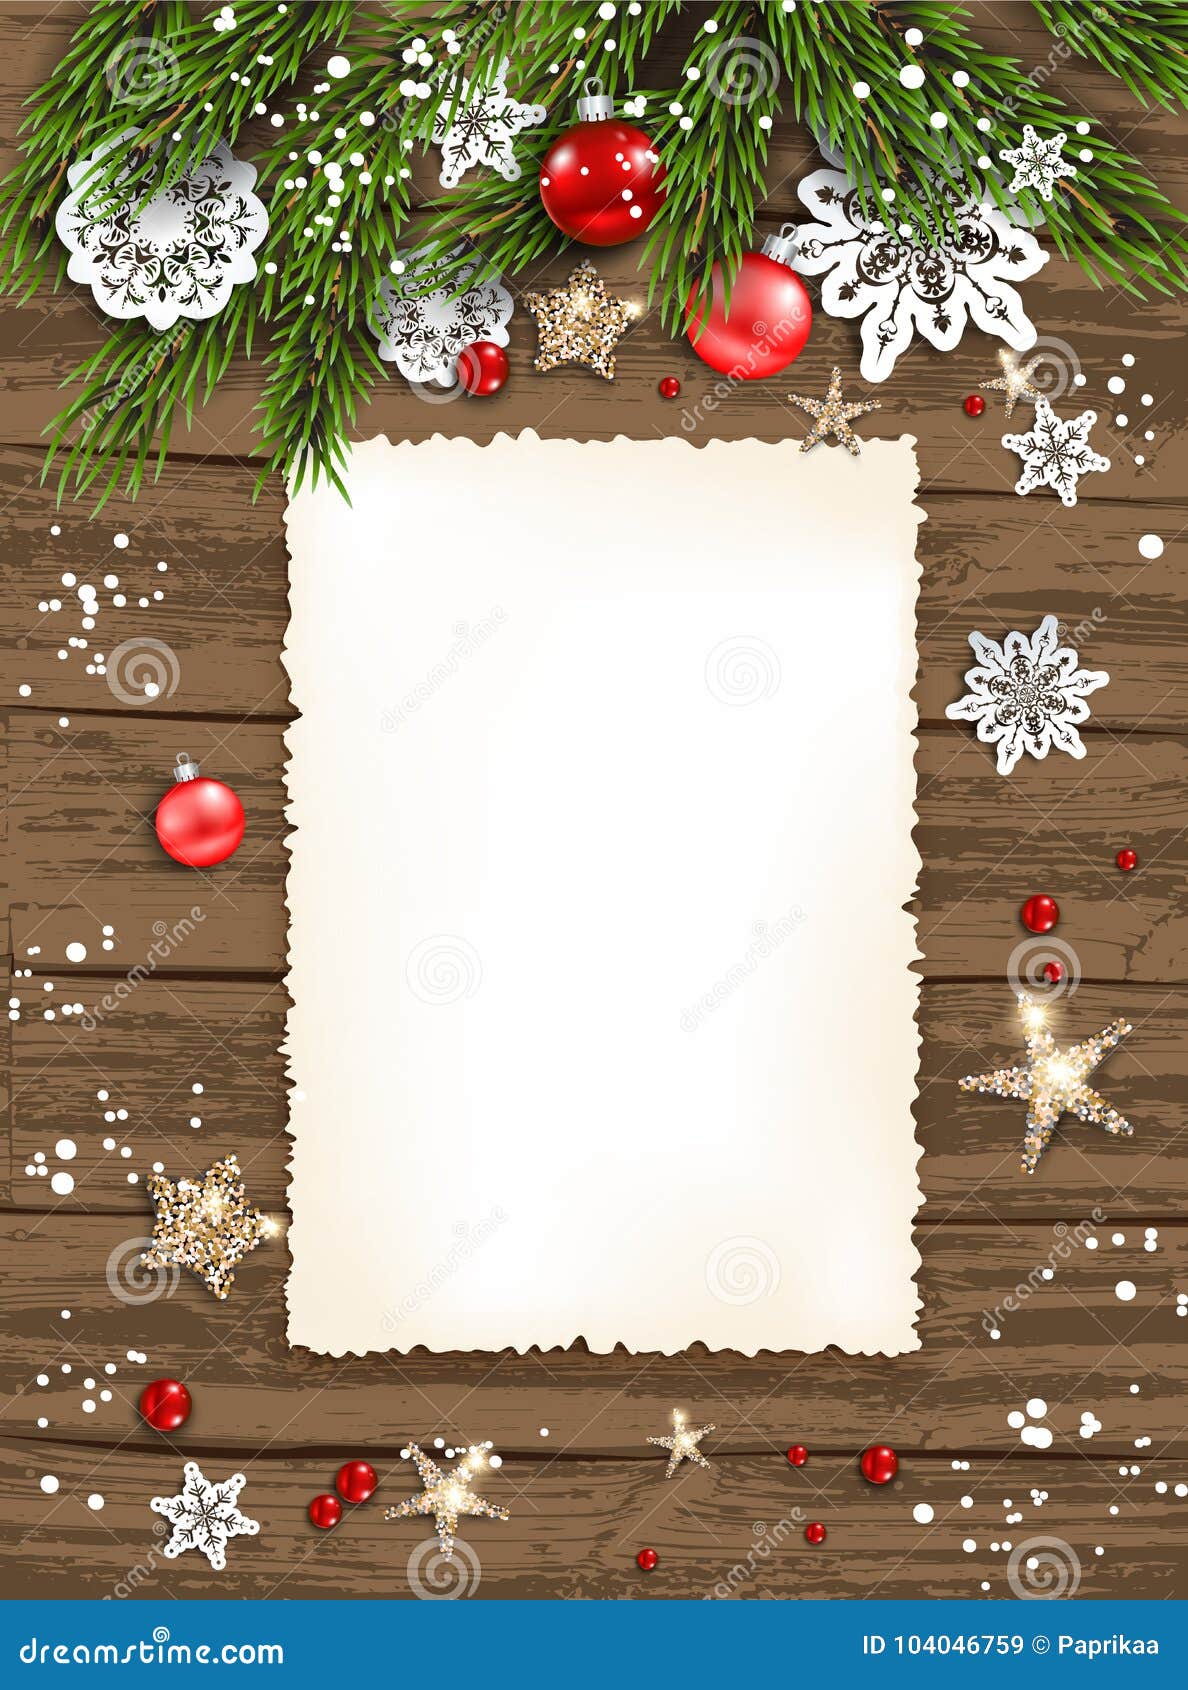 Holiday card frame stock vector. Illustration of poster - 104046759